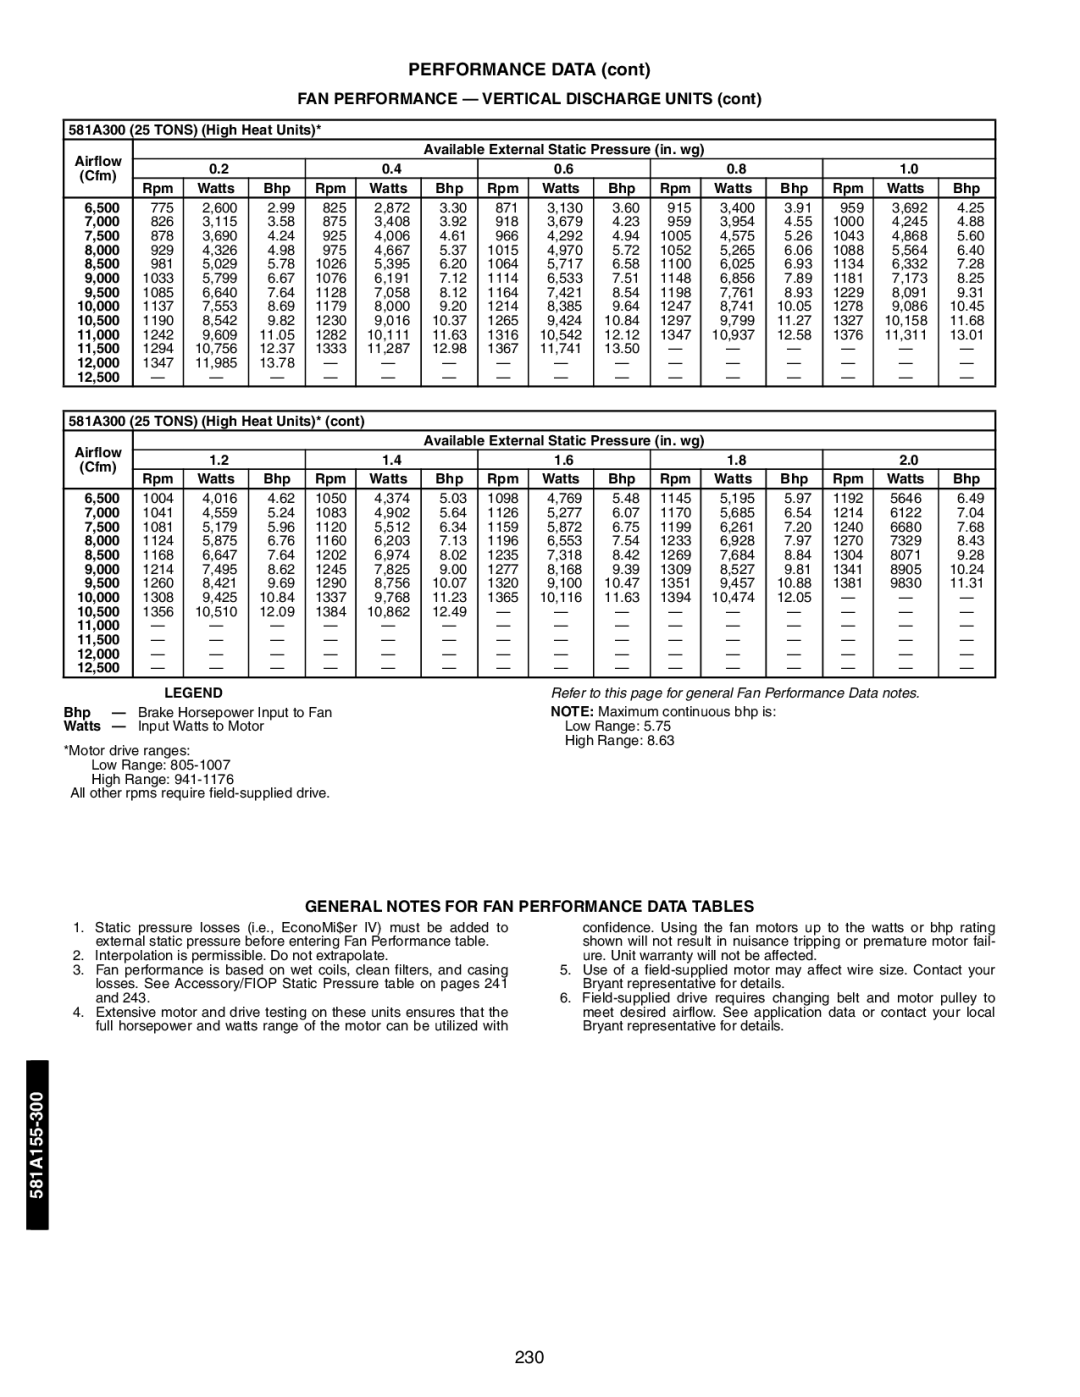 Bryant 581A/B manual General Notes for FAN Performance Data Tables, 581A300 25 Tons High Heat Units 